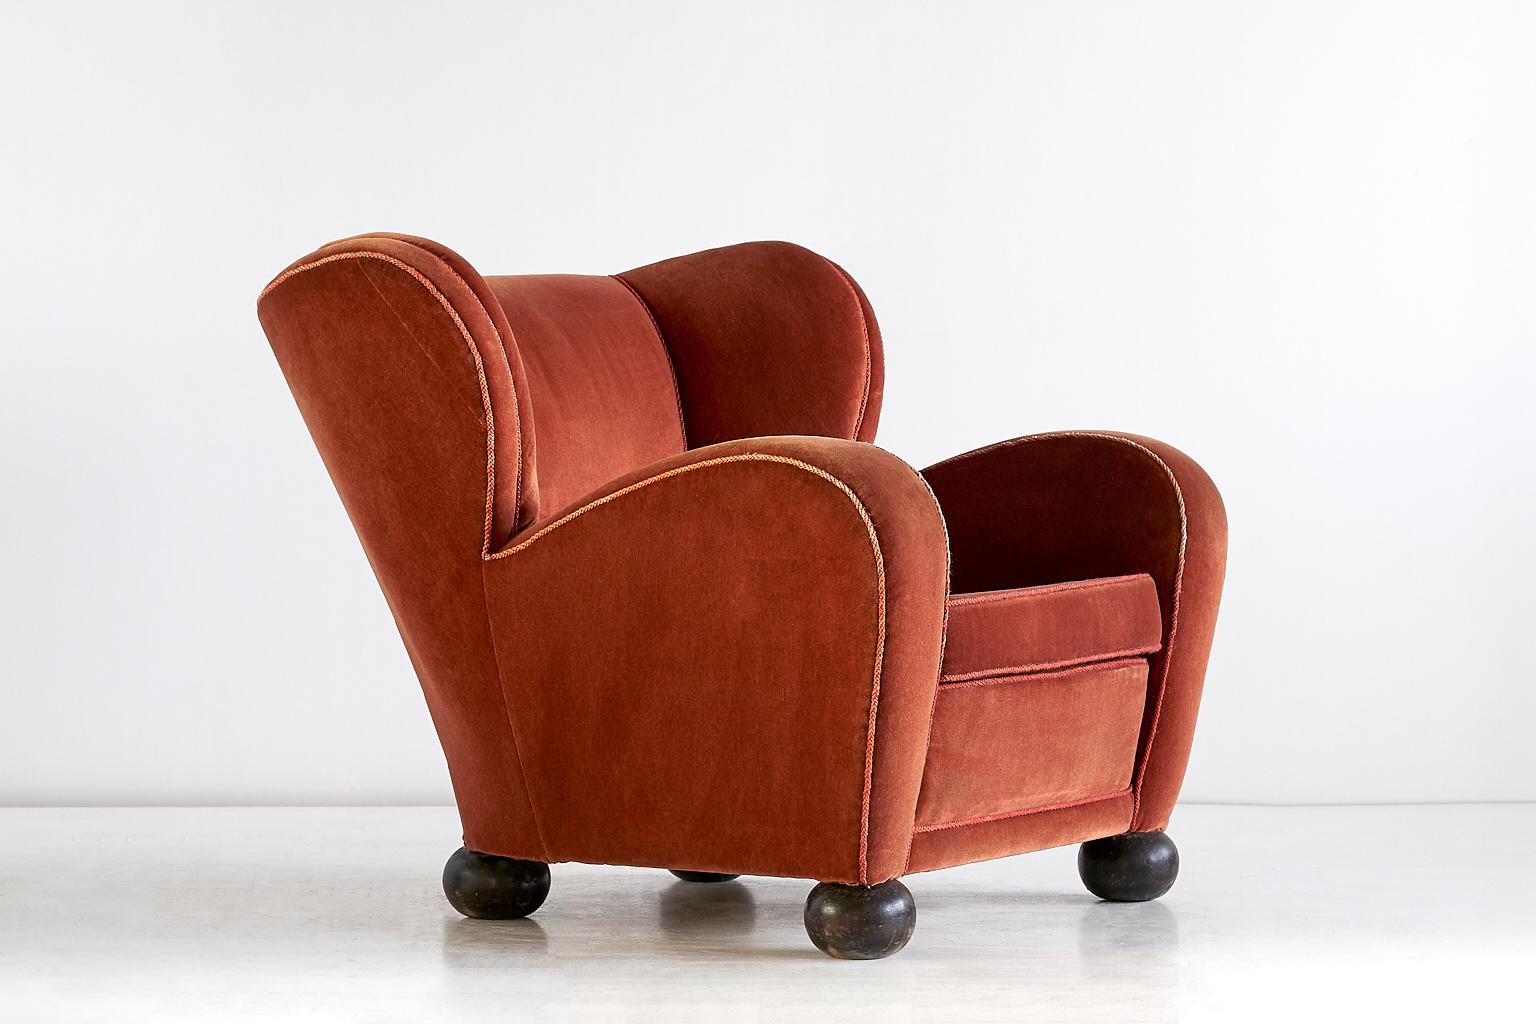 Finnish Märta Blomstedt Armchair in Mohair Designed for Hotel Aulanko, Finland, 1939